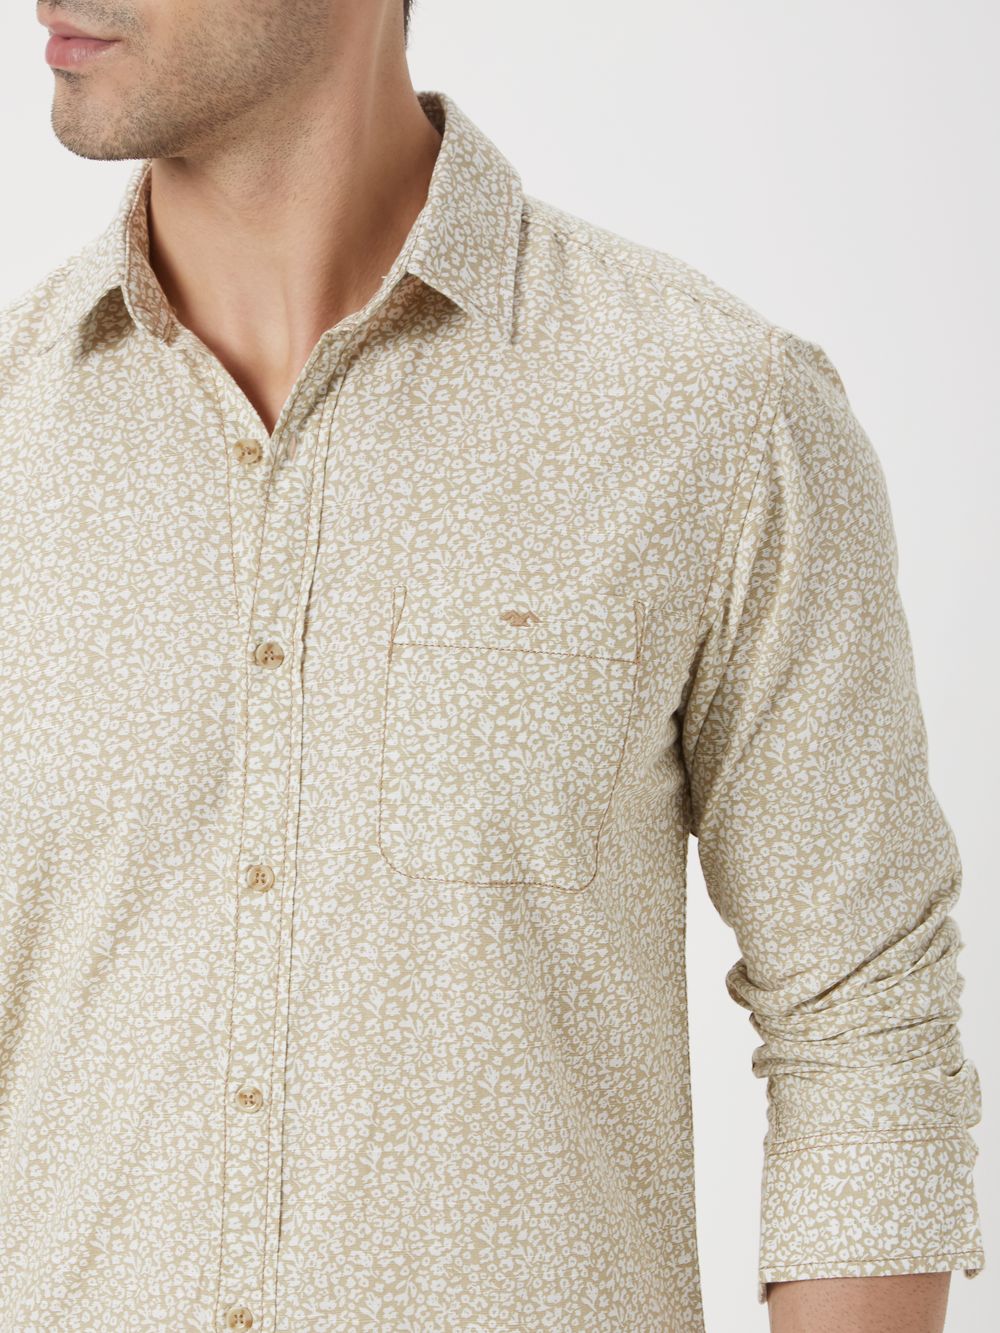 Beige & White Floral Print Slim Fit Casual Shirt